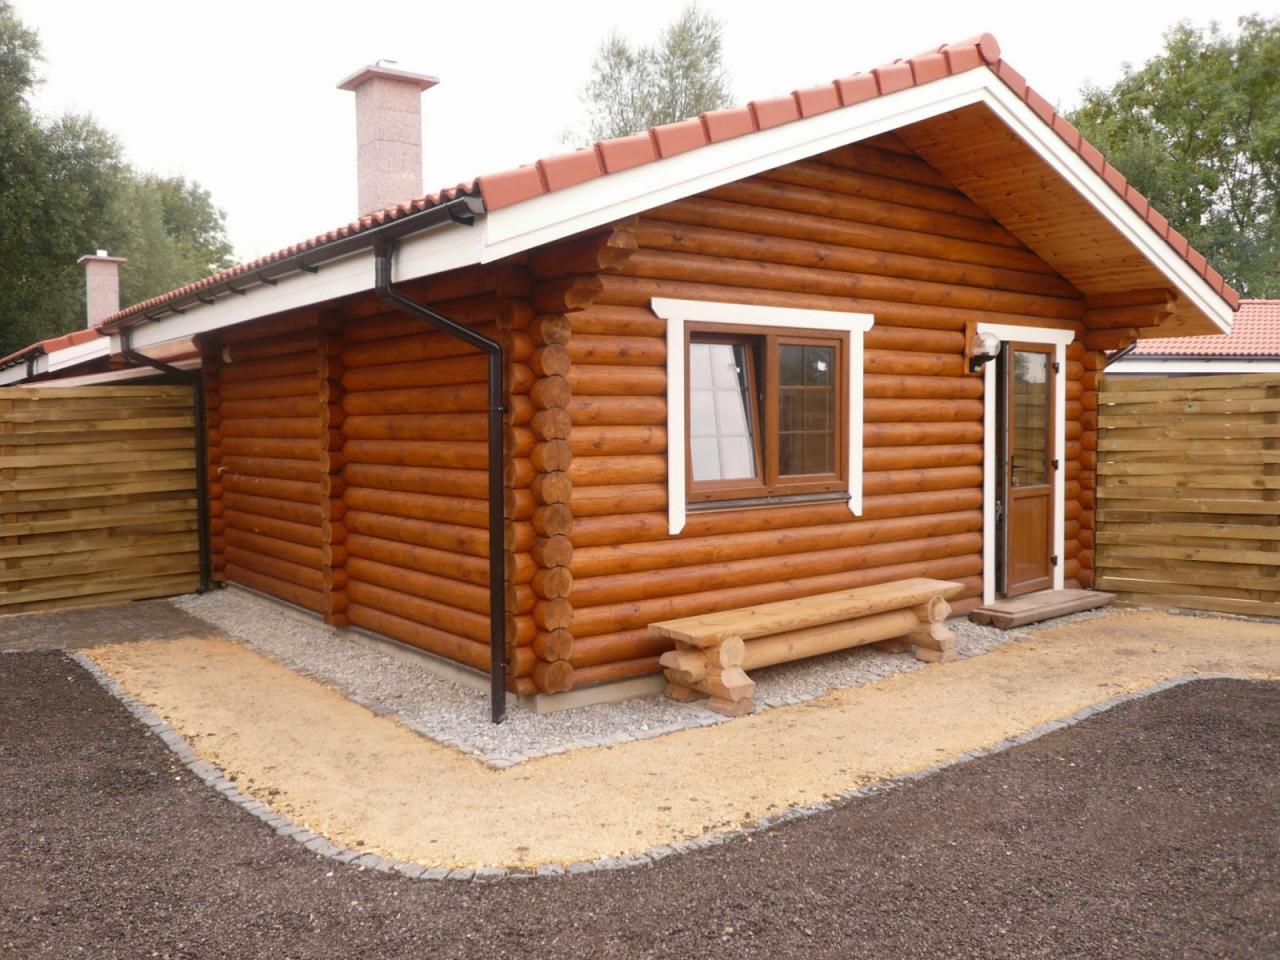 Wooden house cost much does install pineca